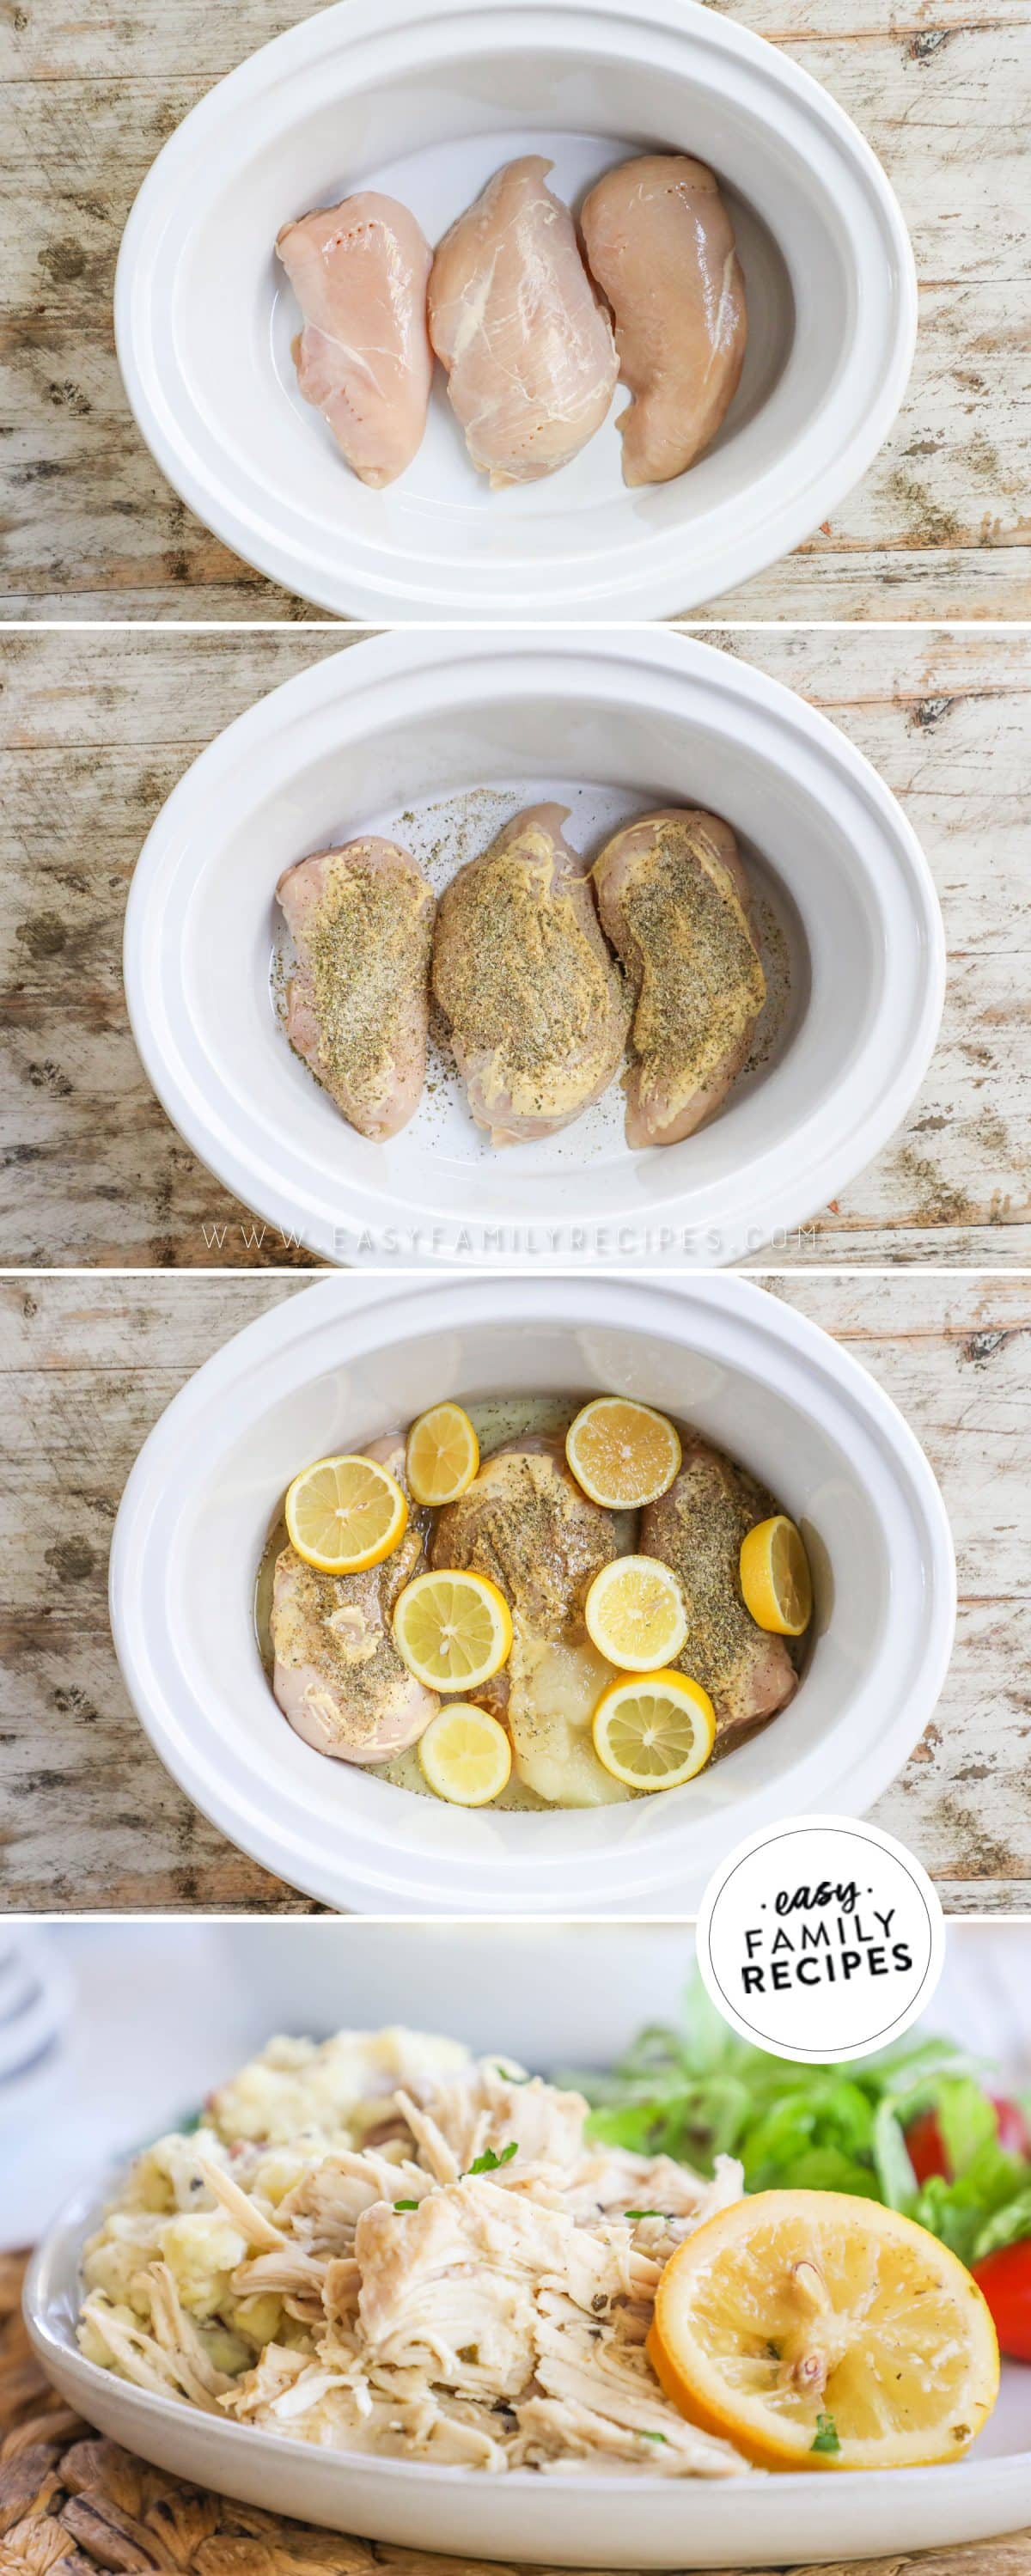 How to make crockpot lemonade chicken: 1) place chicken in crockpot, 2) season the chicken, 3) add lemonade and lemon slices, 4) cook and serve